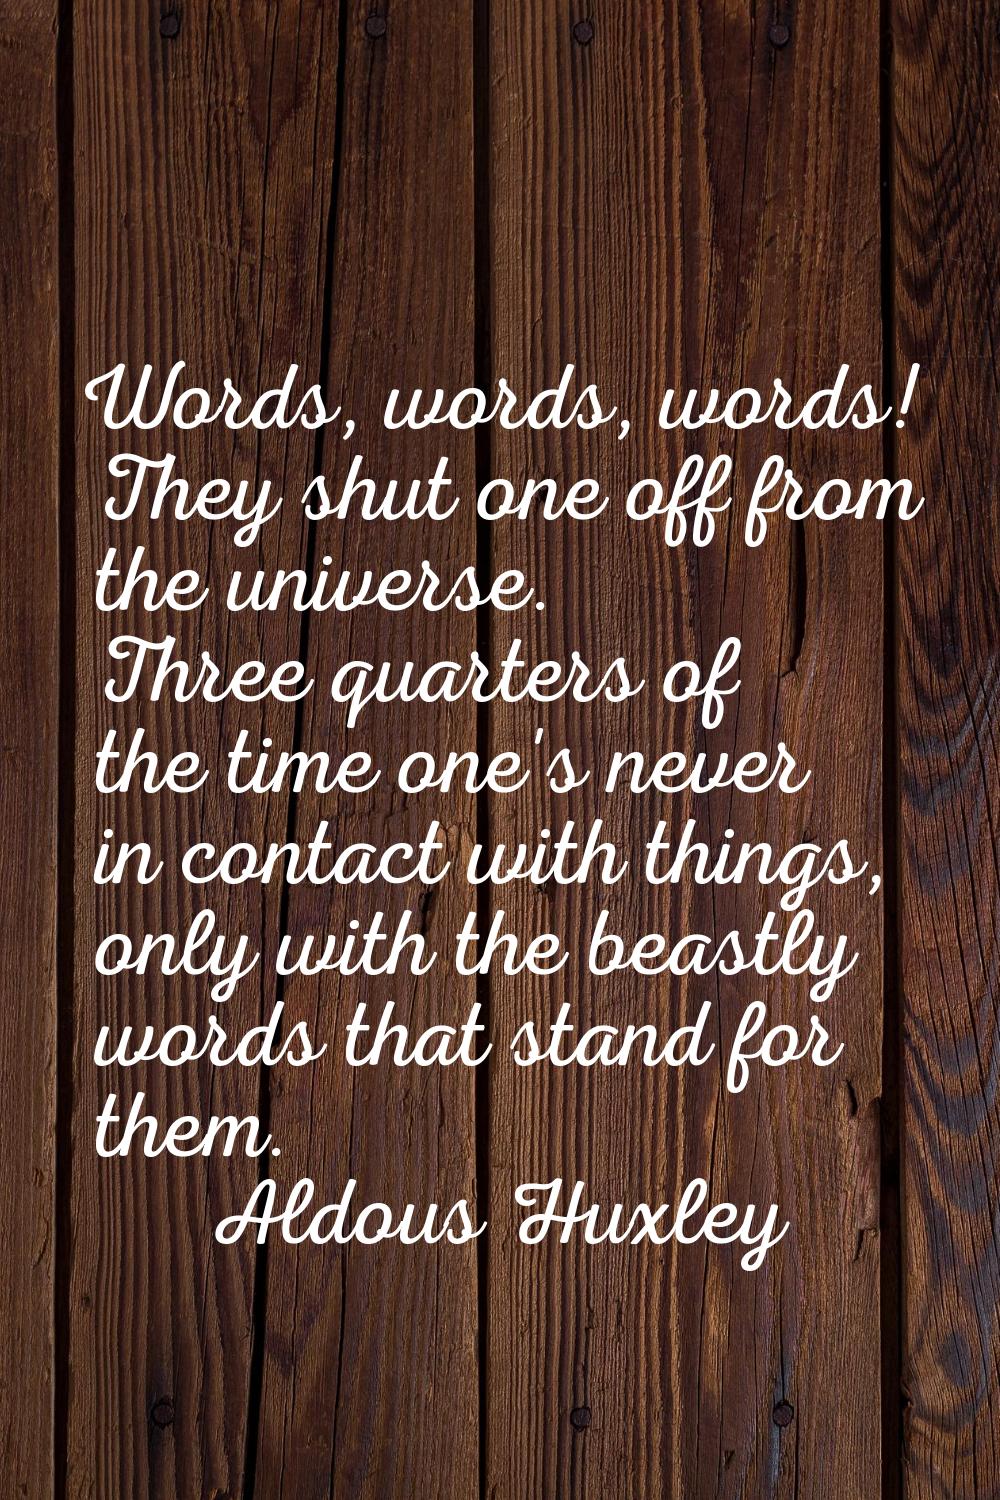 Words, words, words! They shut one off from the universe. Three quarters of the time one's never in